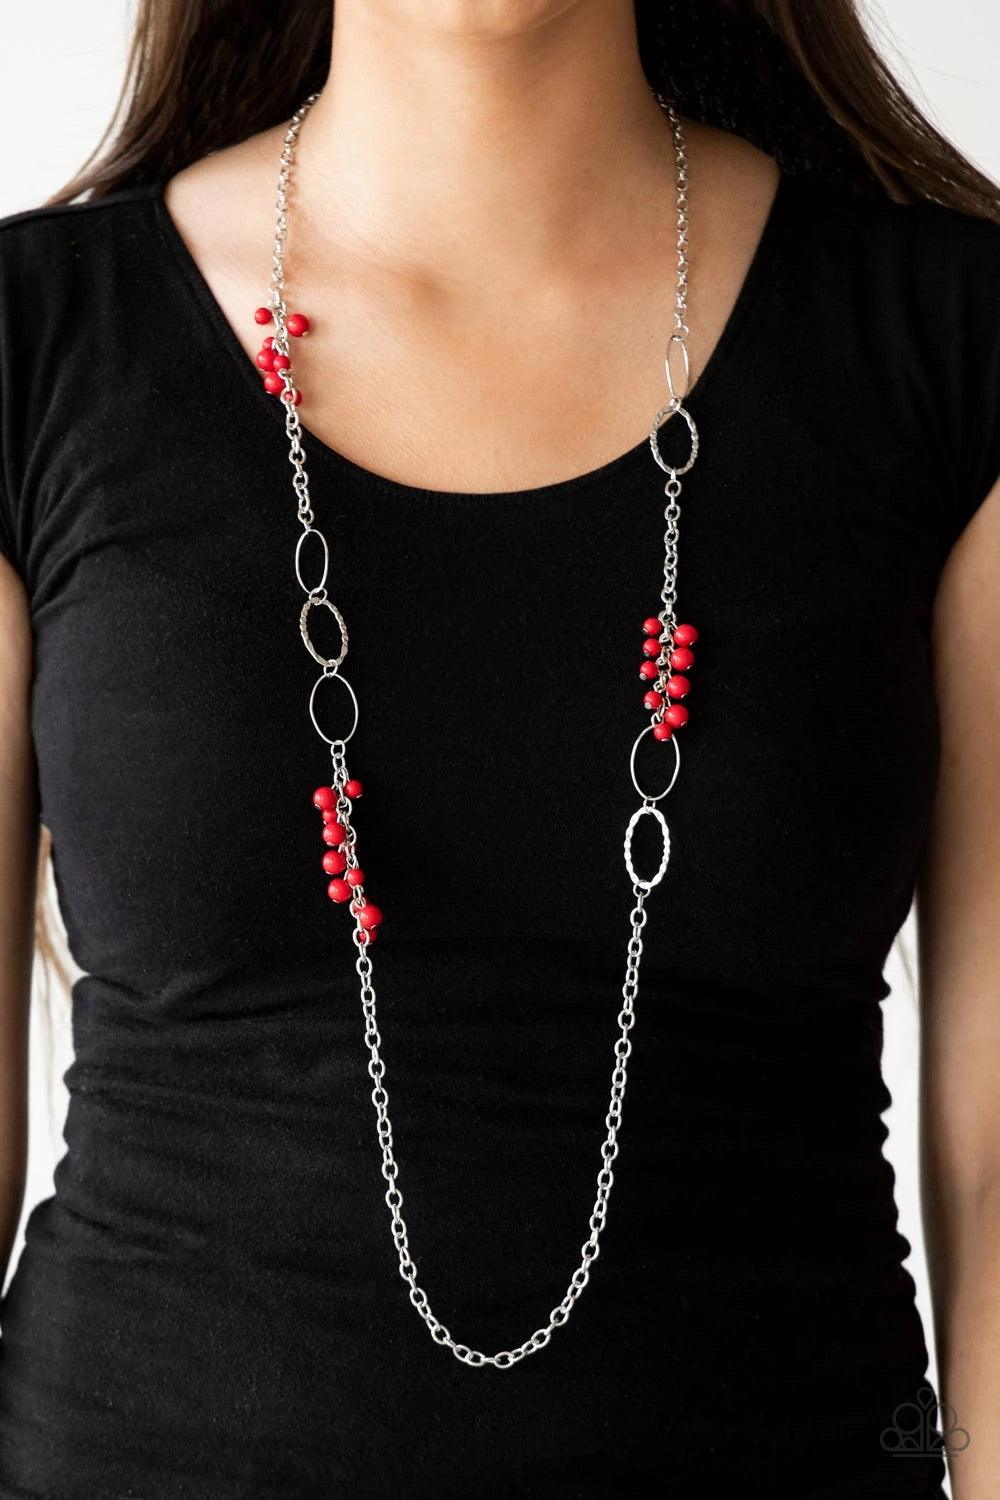 Paparazzi Accessories Flirty Foxtrot - Red Smooth and hammered silver rings join clusters of fiery red beads along a shimmery silver chain for a colorful look. Features an adjustable clasp closure. Sold as one individual necklace. Includes one pair of mat